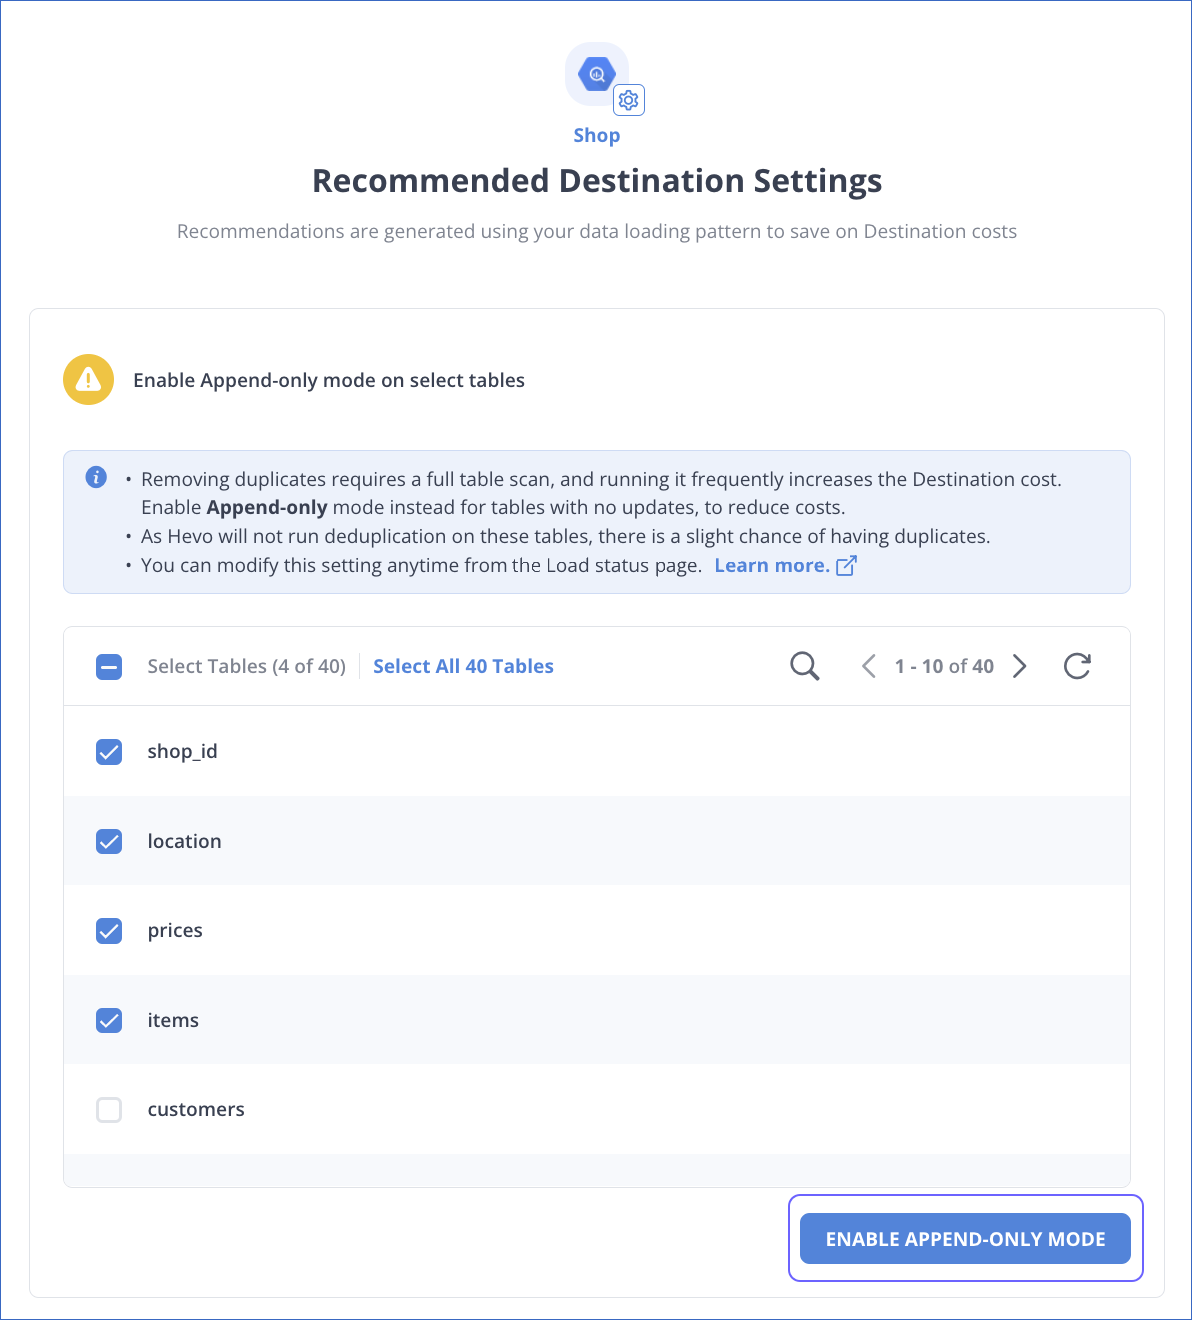 Recommended Destination Settings